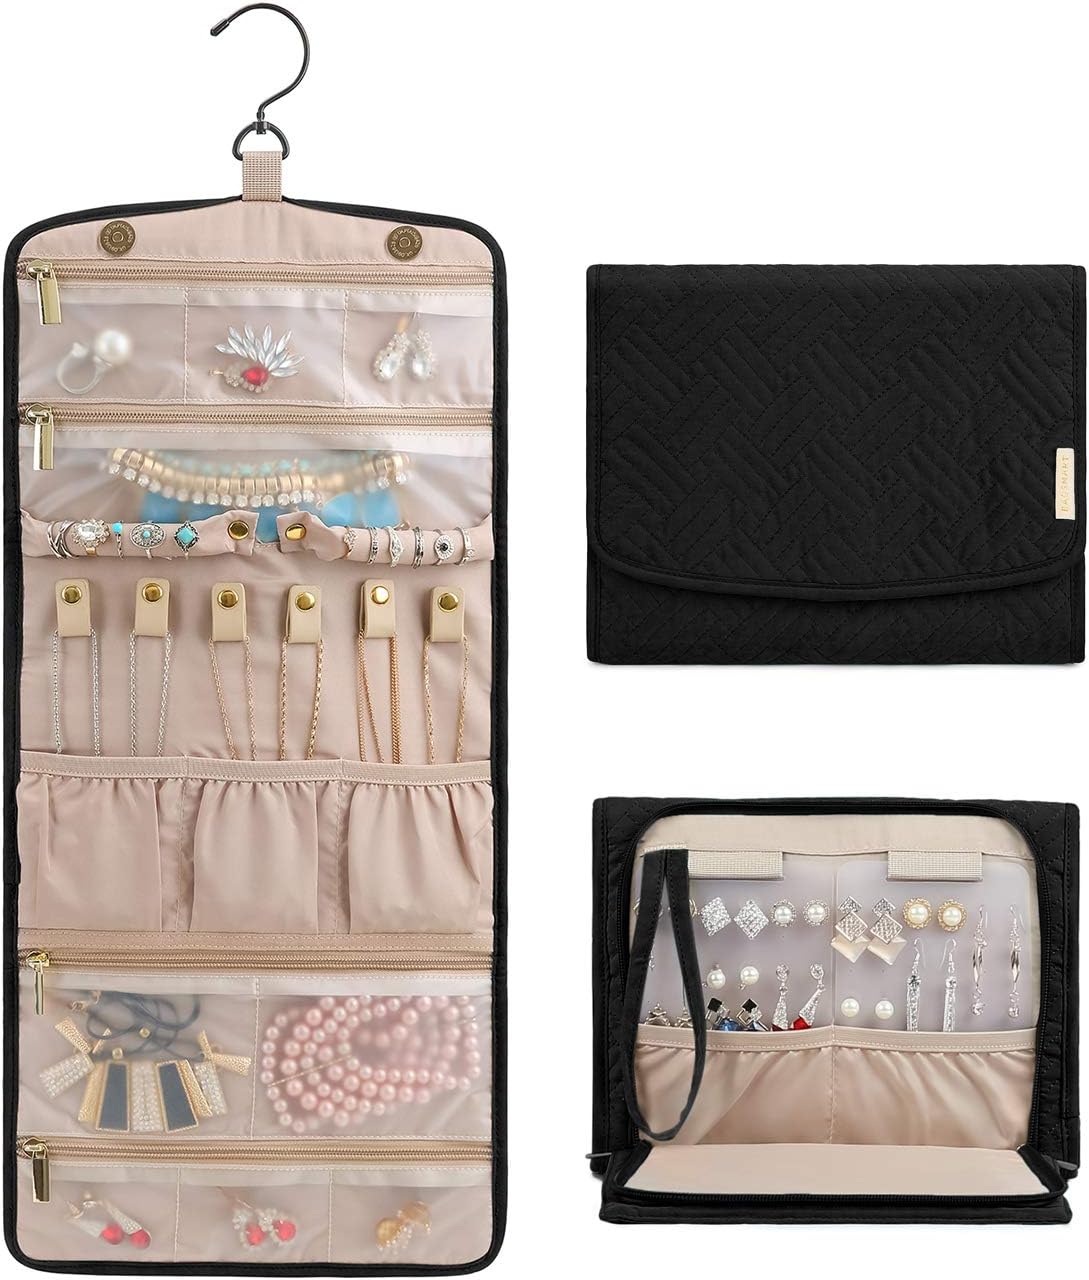 Blushbees® Foldable Travel Hanging Jewelry Organizer - Soft Pink